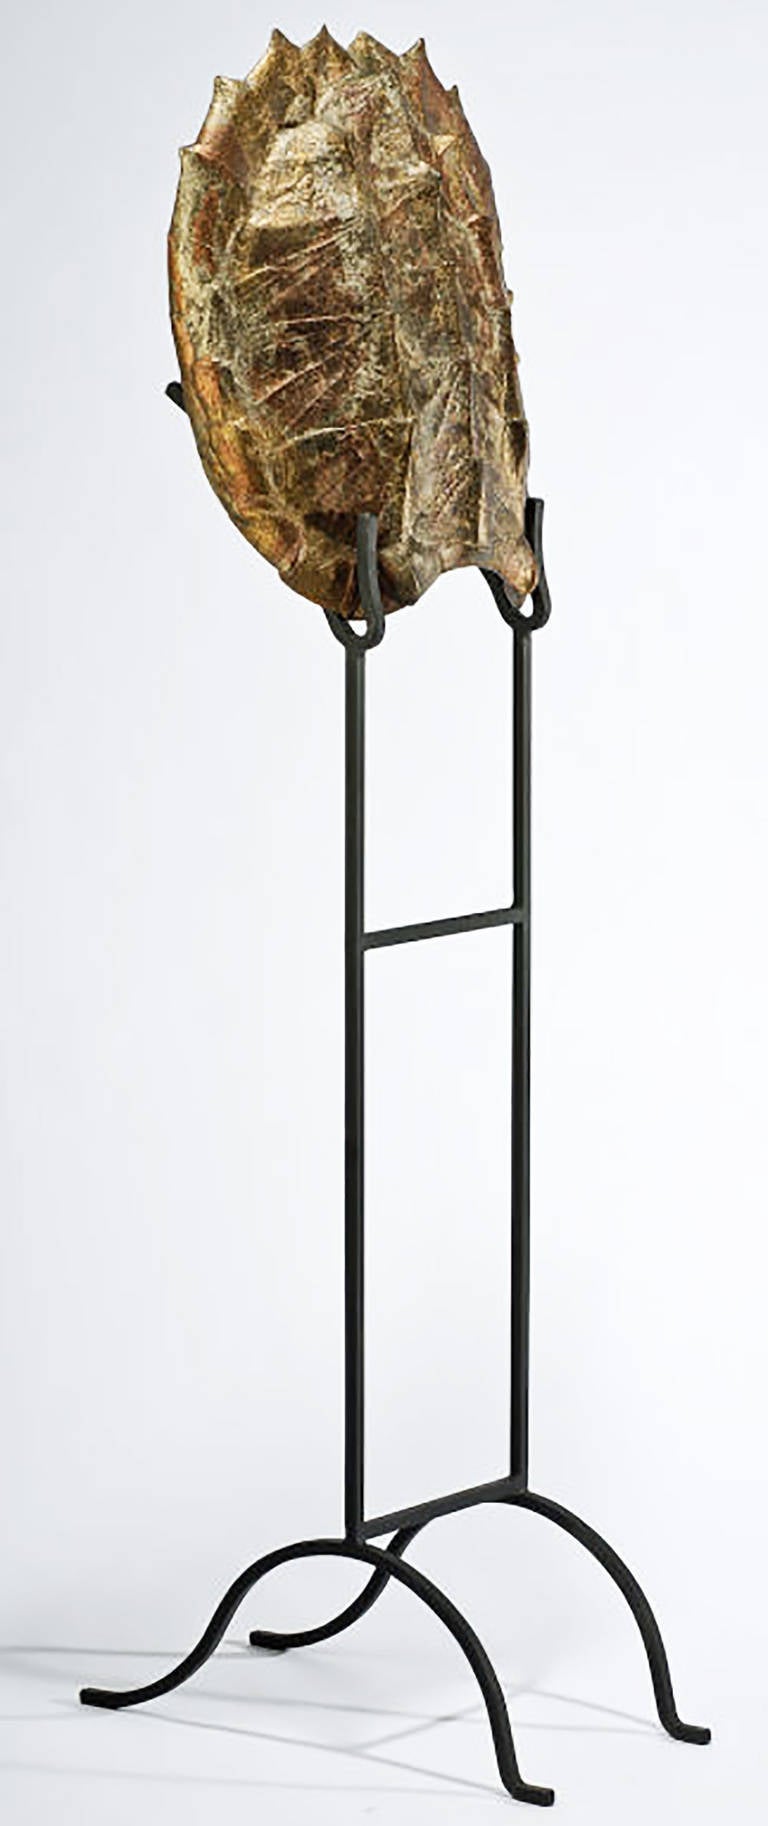 A very sculptural resin tortoise (or turtle) shell, mounted on a tall black wrought iron stand. Hand-painted finish includes accents of copper and gold coloring. Shell measures: 28